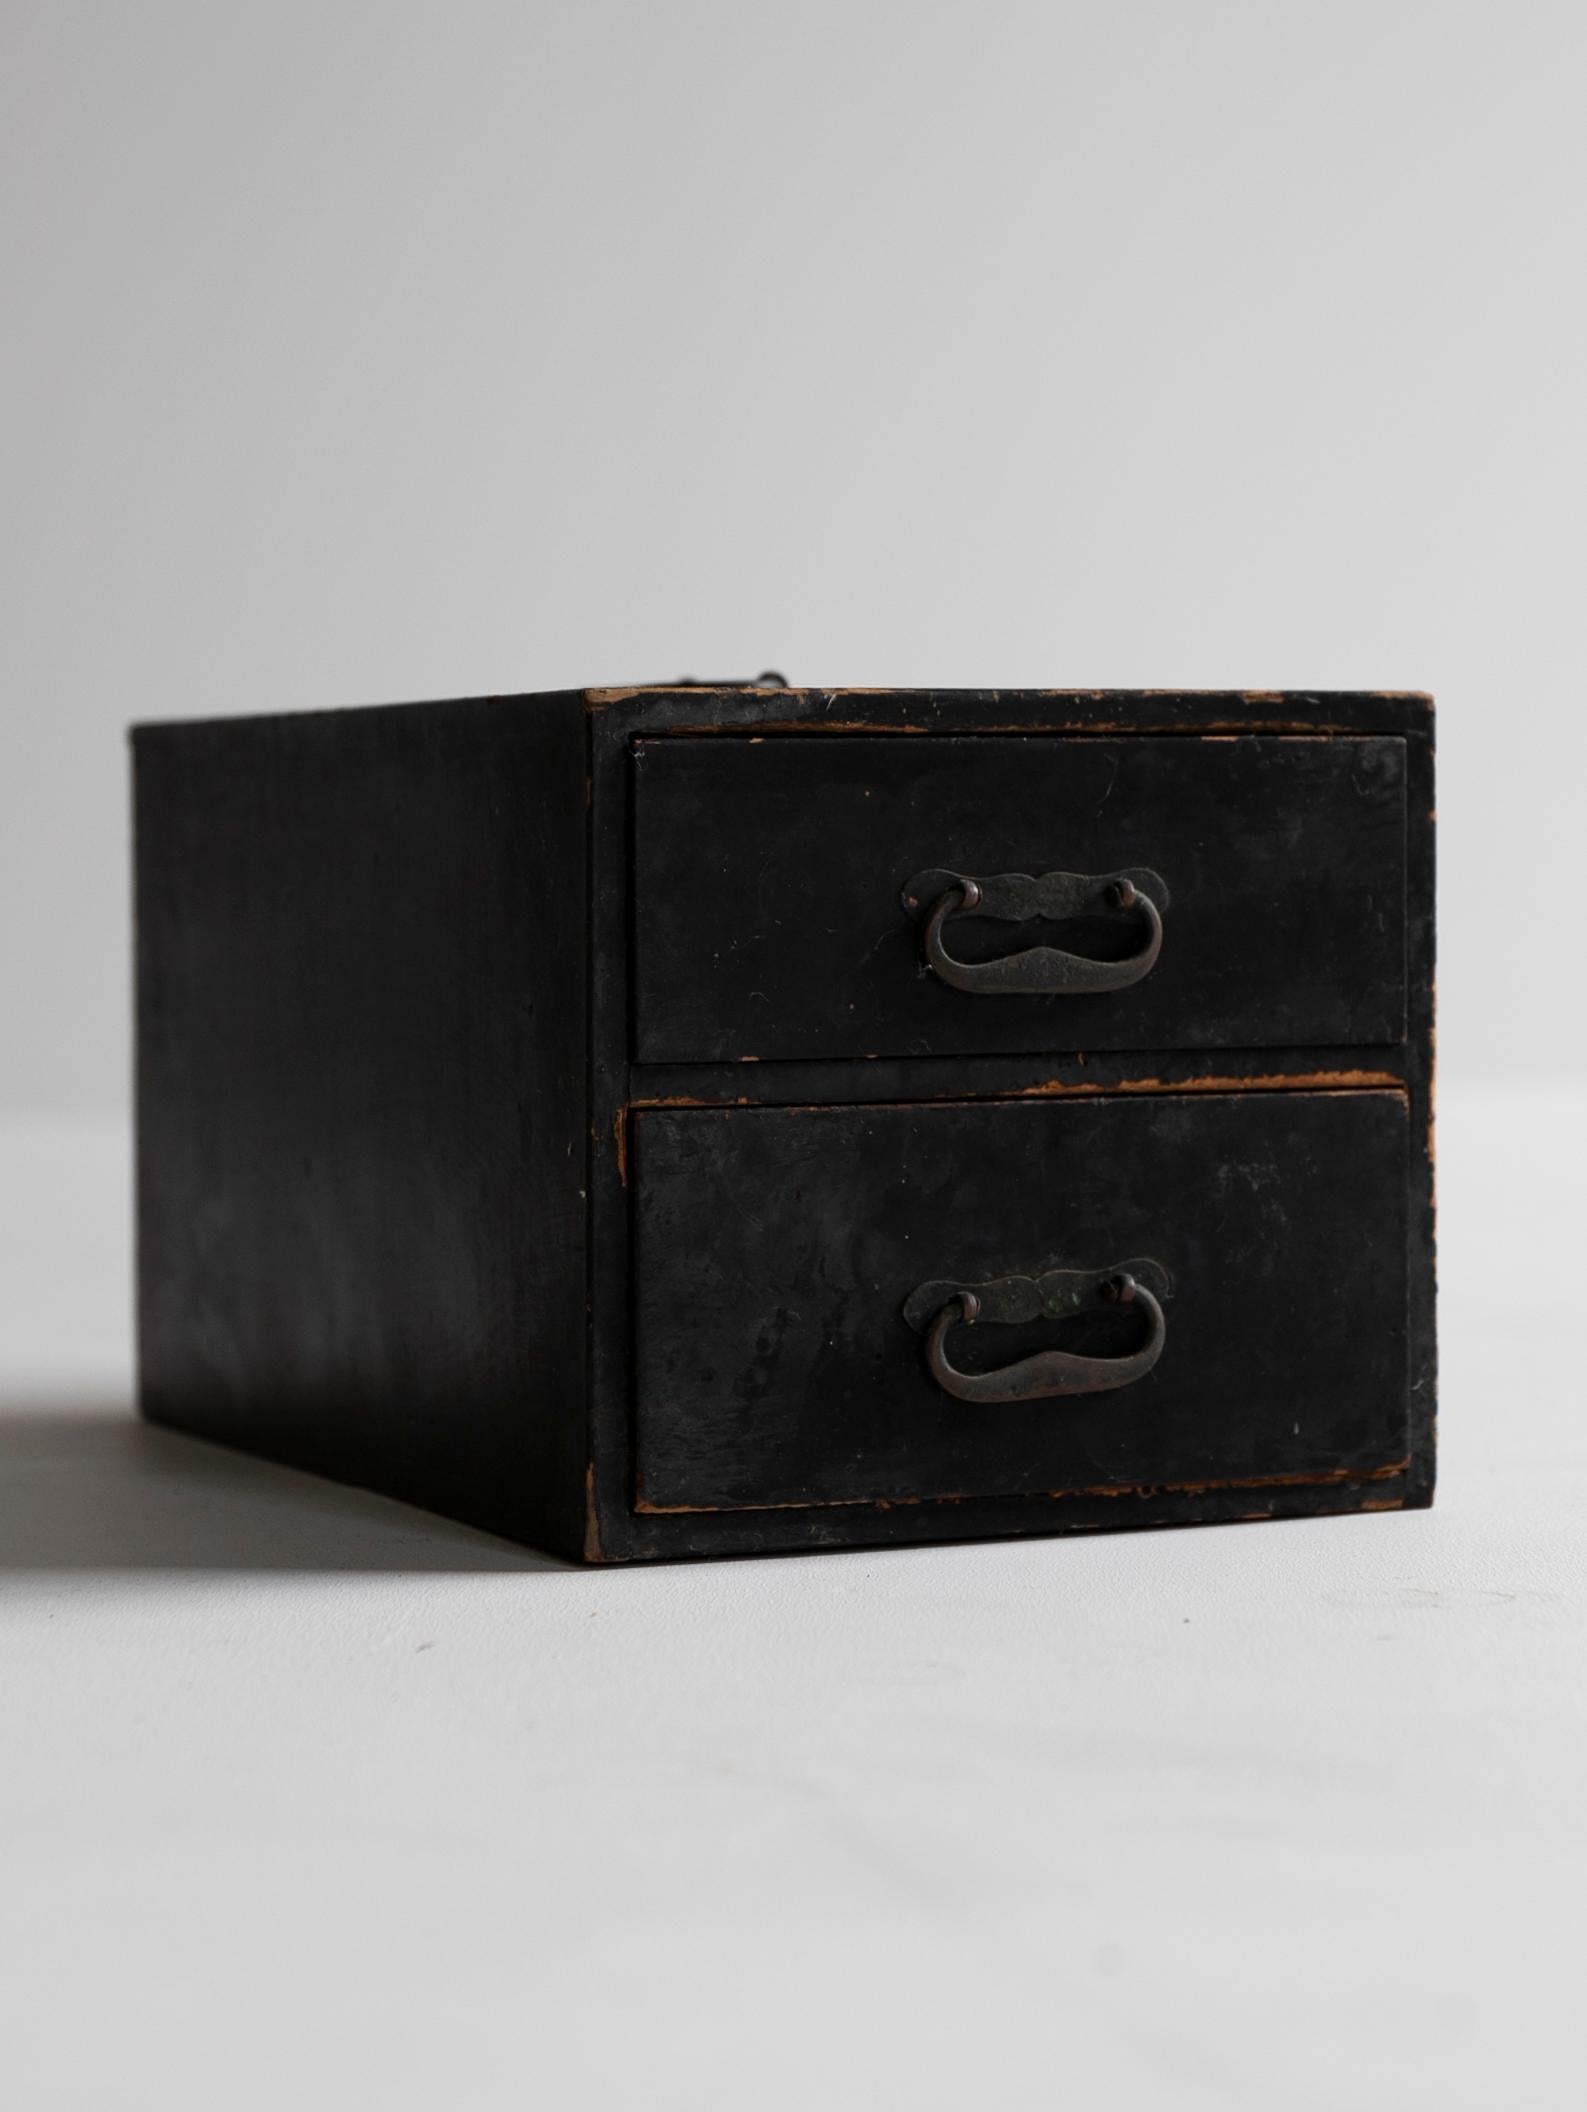 We have a uniquely Japanese aesthetic.
And thanks to our Japanese sourcing channels and our experience, we are uniquely placed to introduce unique items that no one else can imitate.

These drawer chests were made between the end of the Edo